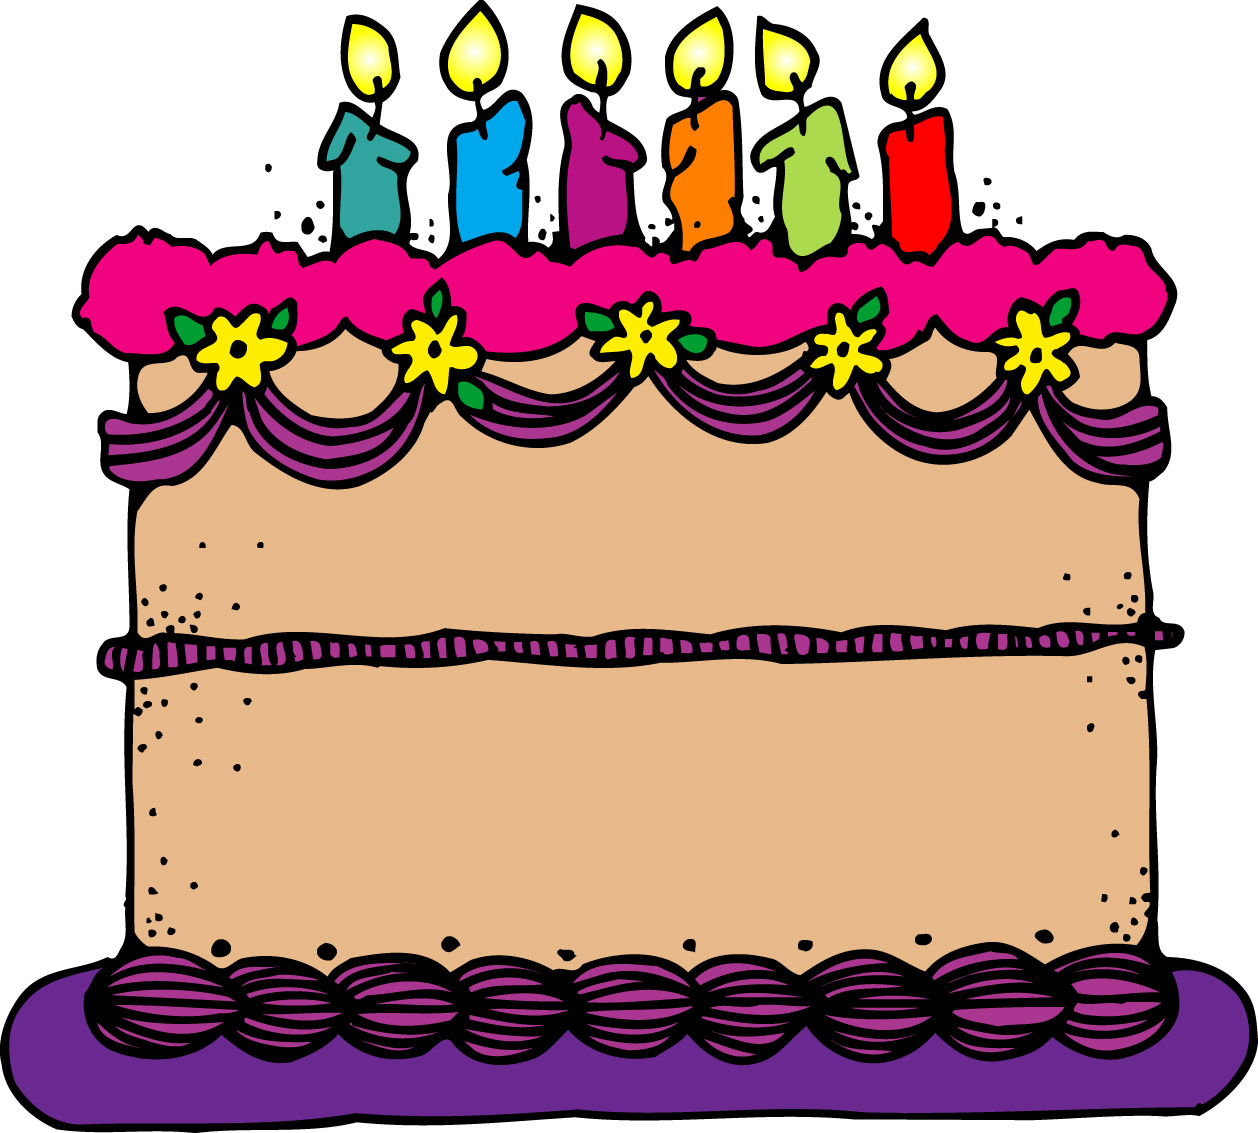 Free Happy Birthday Cake Clipart, Download Free Clip Art